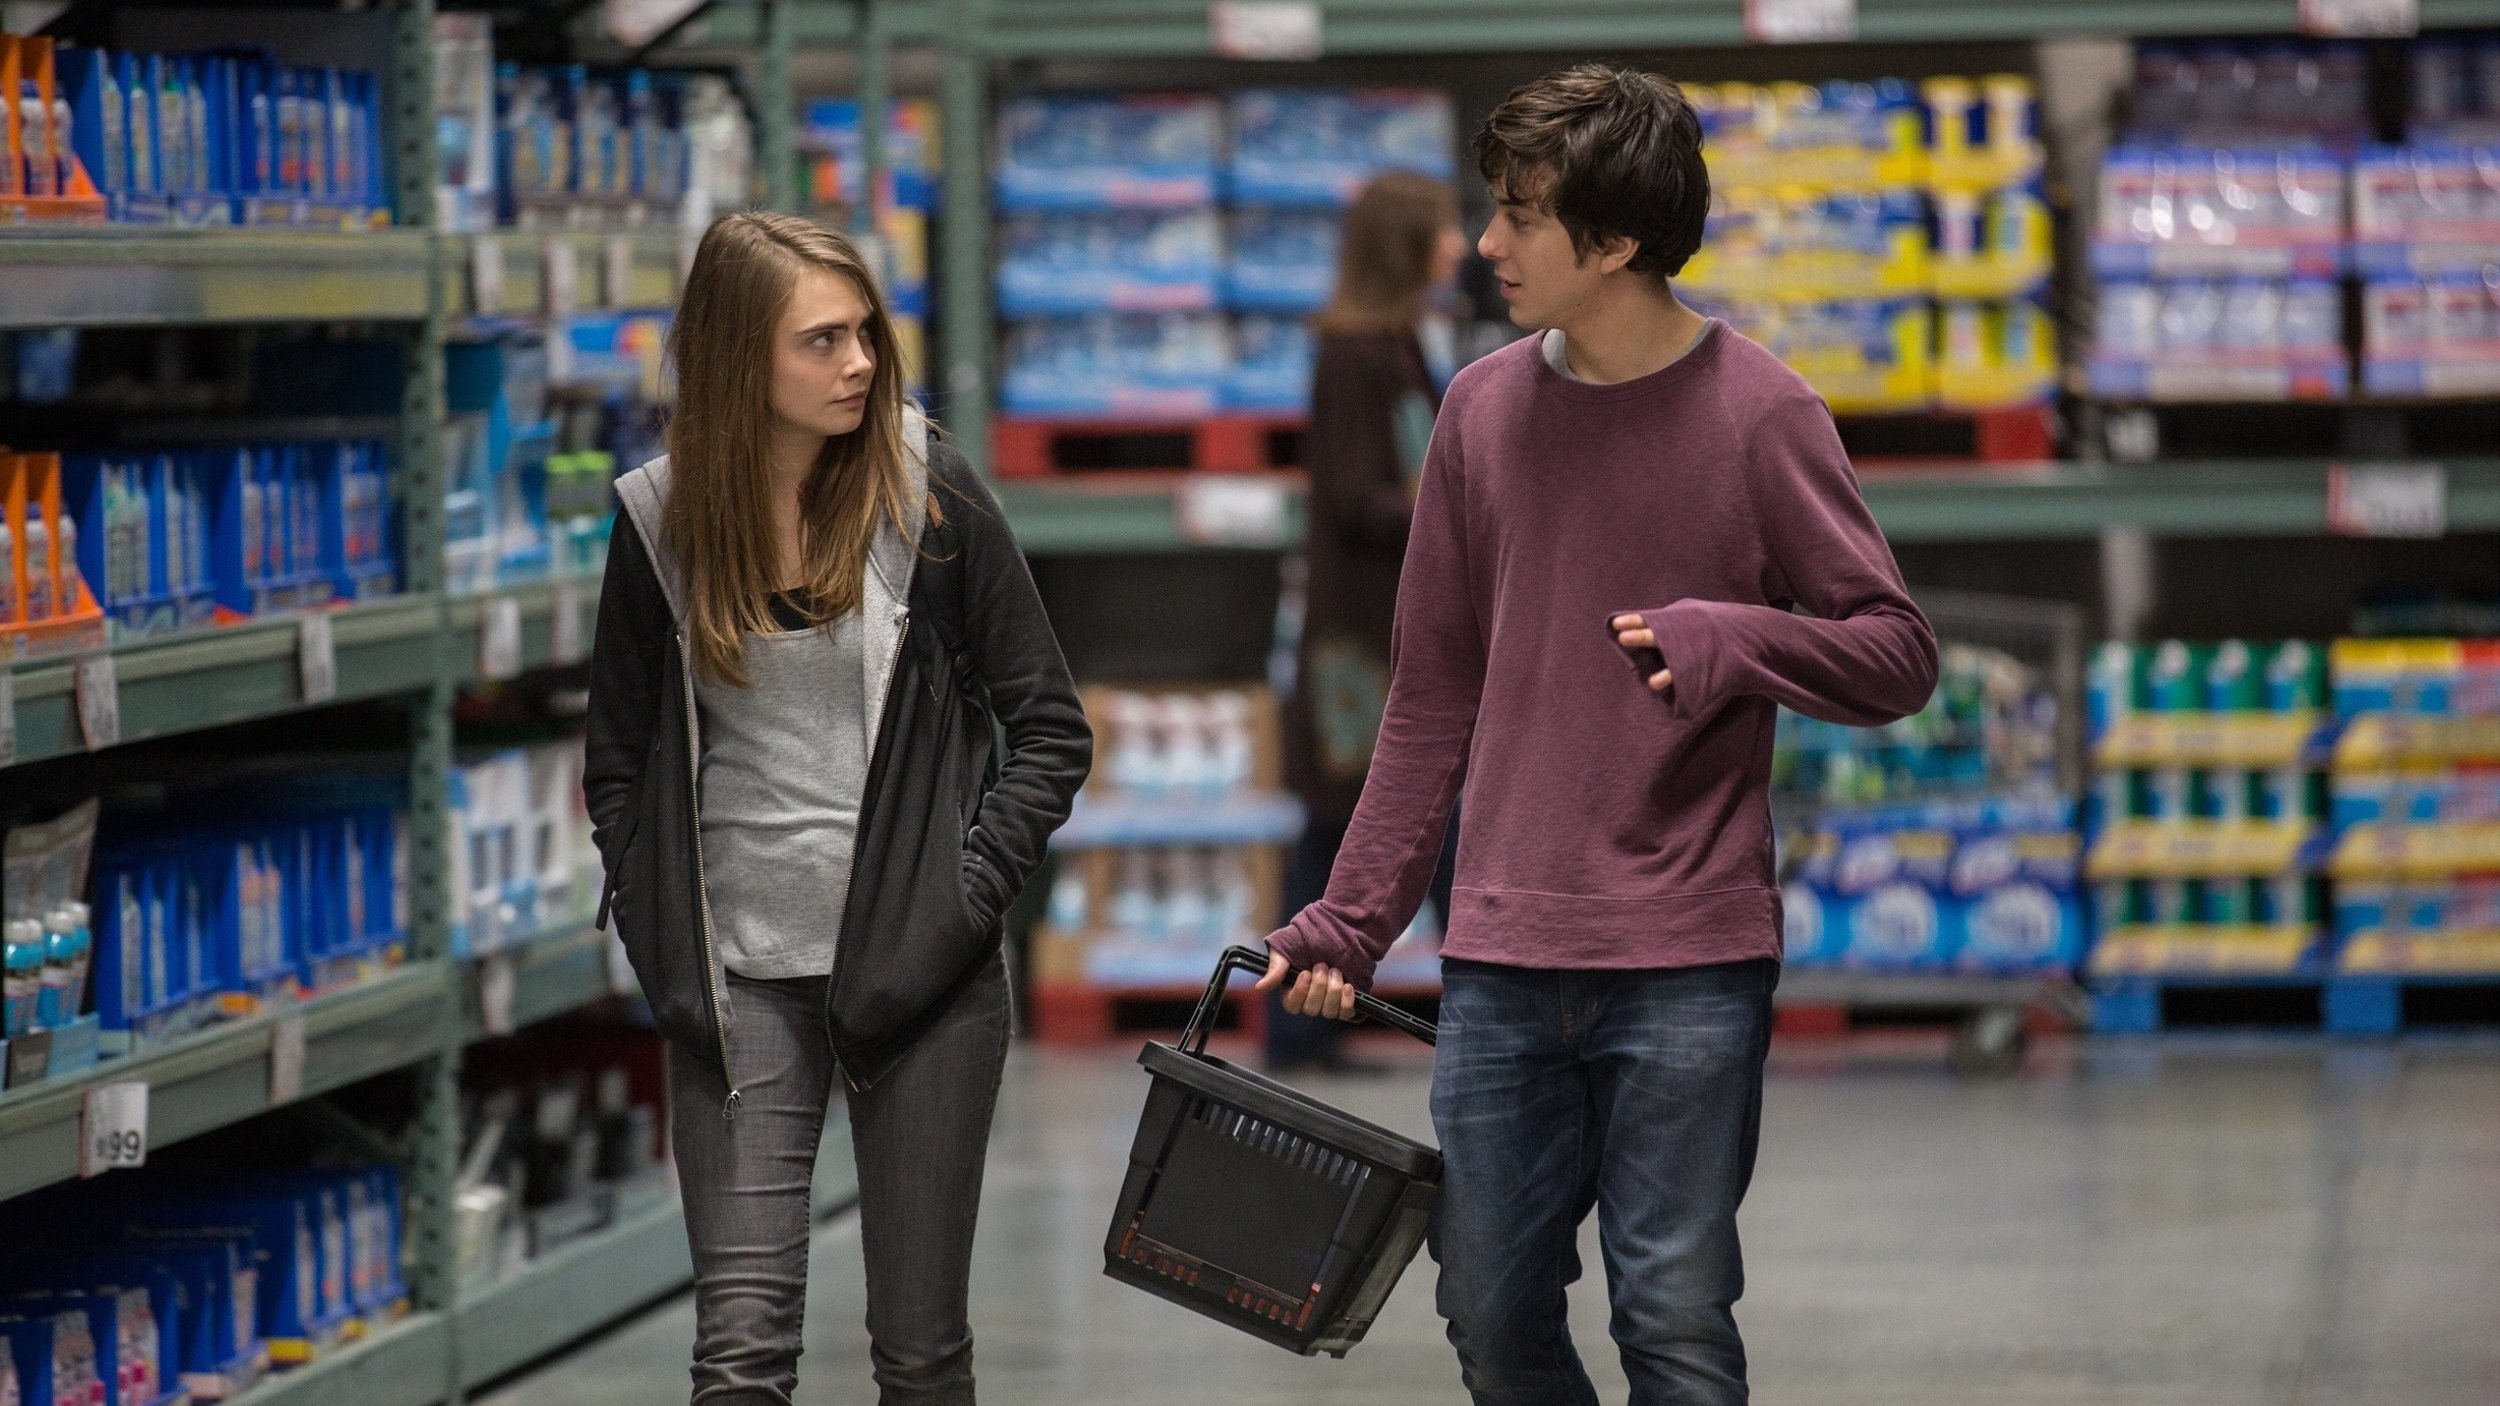 <p>The adaptation of John Green’s “The Fault in Our Stars” was hugely successful, so the film industry decided to try its luck again by adapting an early book from the YA author. Unlike “The Fault in Our Stars,” “Paper Towns” was just sort of a bland mess. It was a low-budget movie, so it made money, but nobody, other than some teens who love any tragic romance story, seemed to really like it. “Paper Towns” has a 56 percent rating on Rotten Tomatoes and on Metacritic.</p><p>You may also like: <a href='https://www.yardbarker.com/entertainment/articles/20_essential_songs_by_the_chicks_030624/s1__37654403'>20 essential songs by The Chicks</a></p>